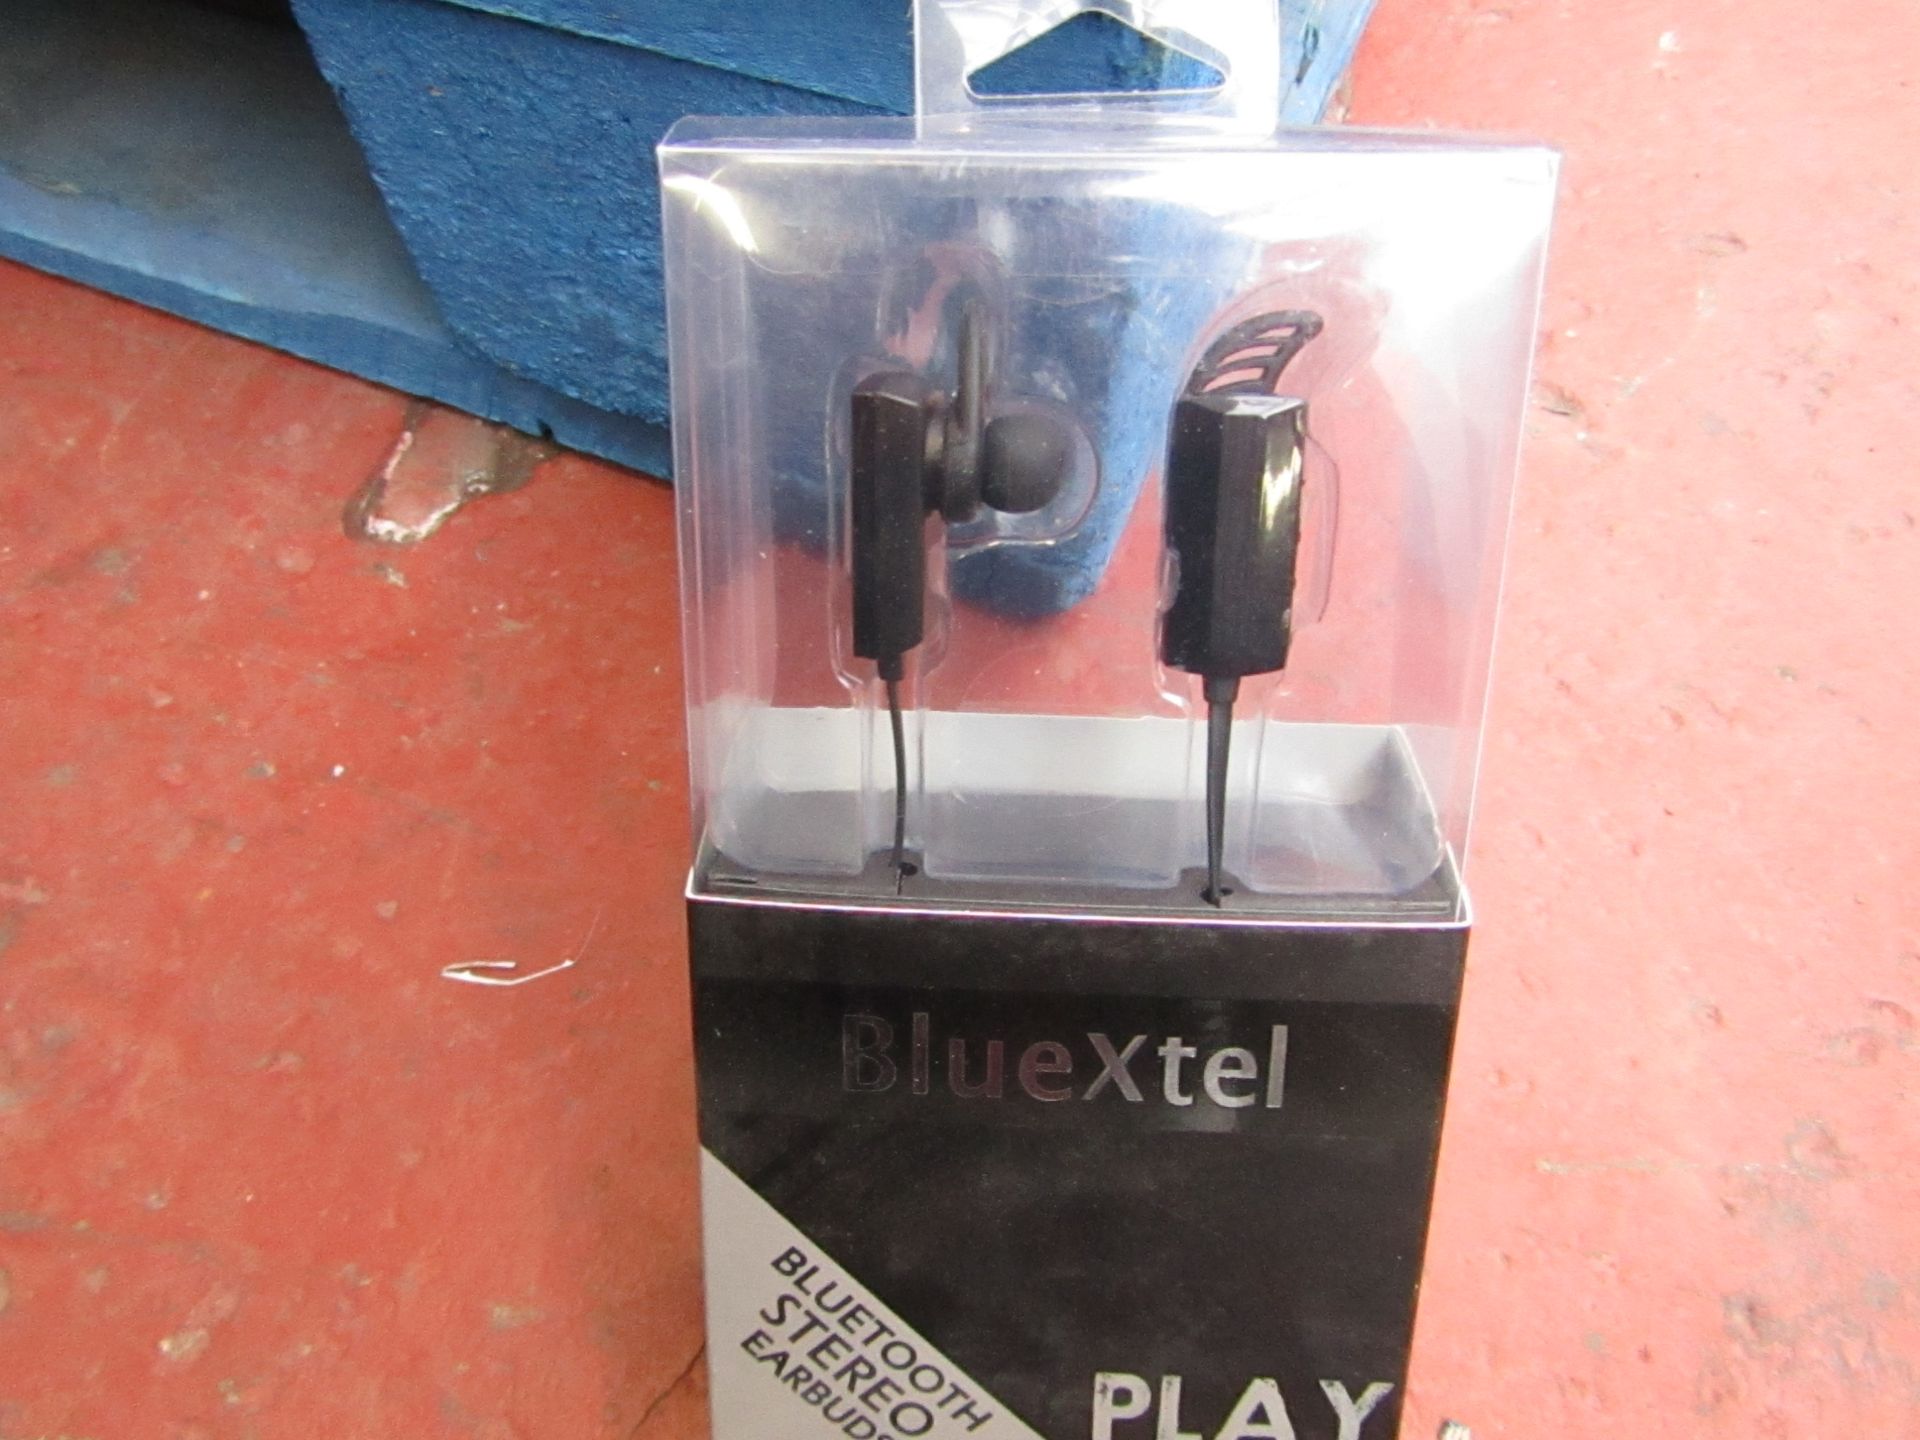 BlueXtel Bluetooth stereo earbuds, new and packaged.